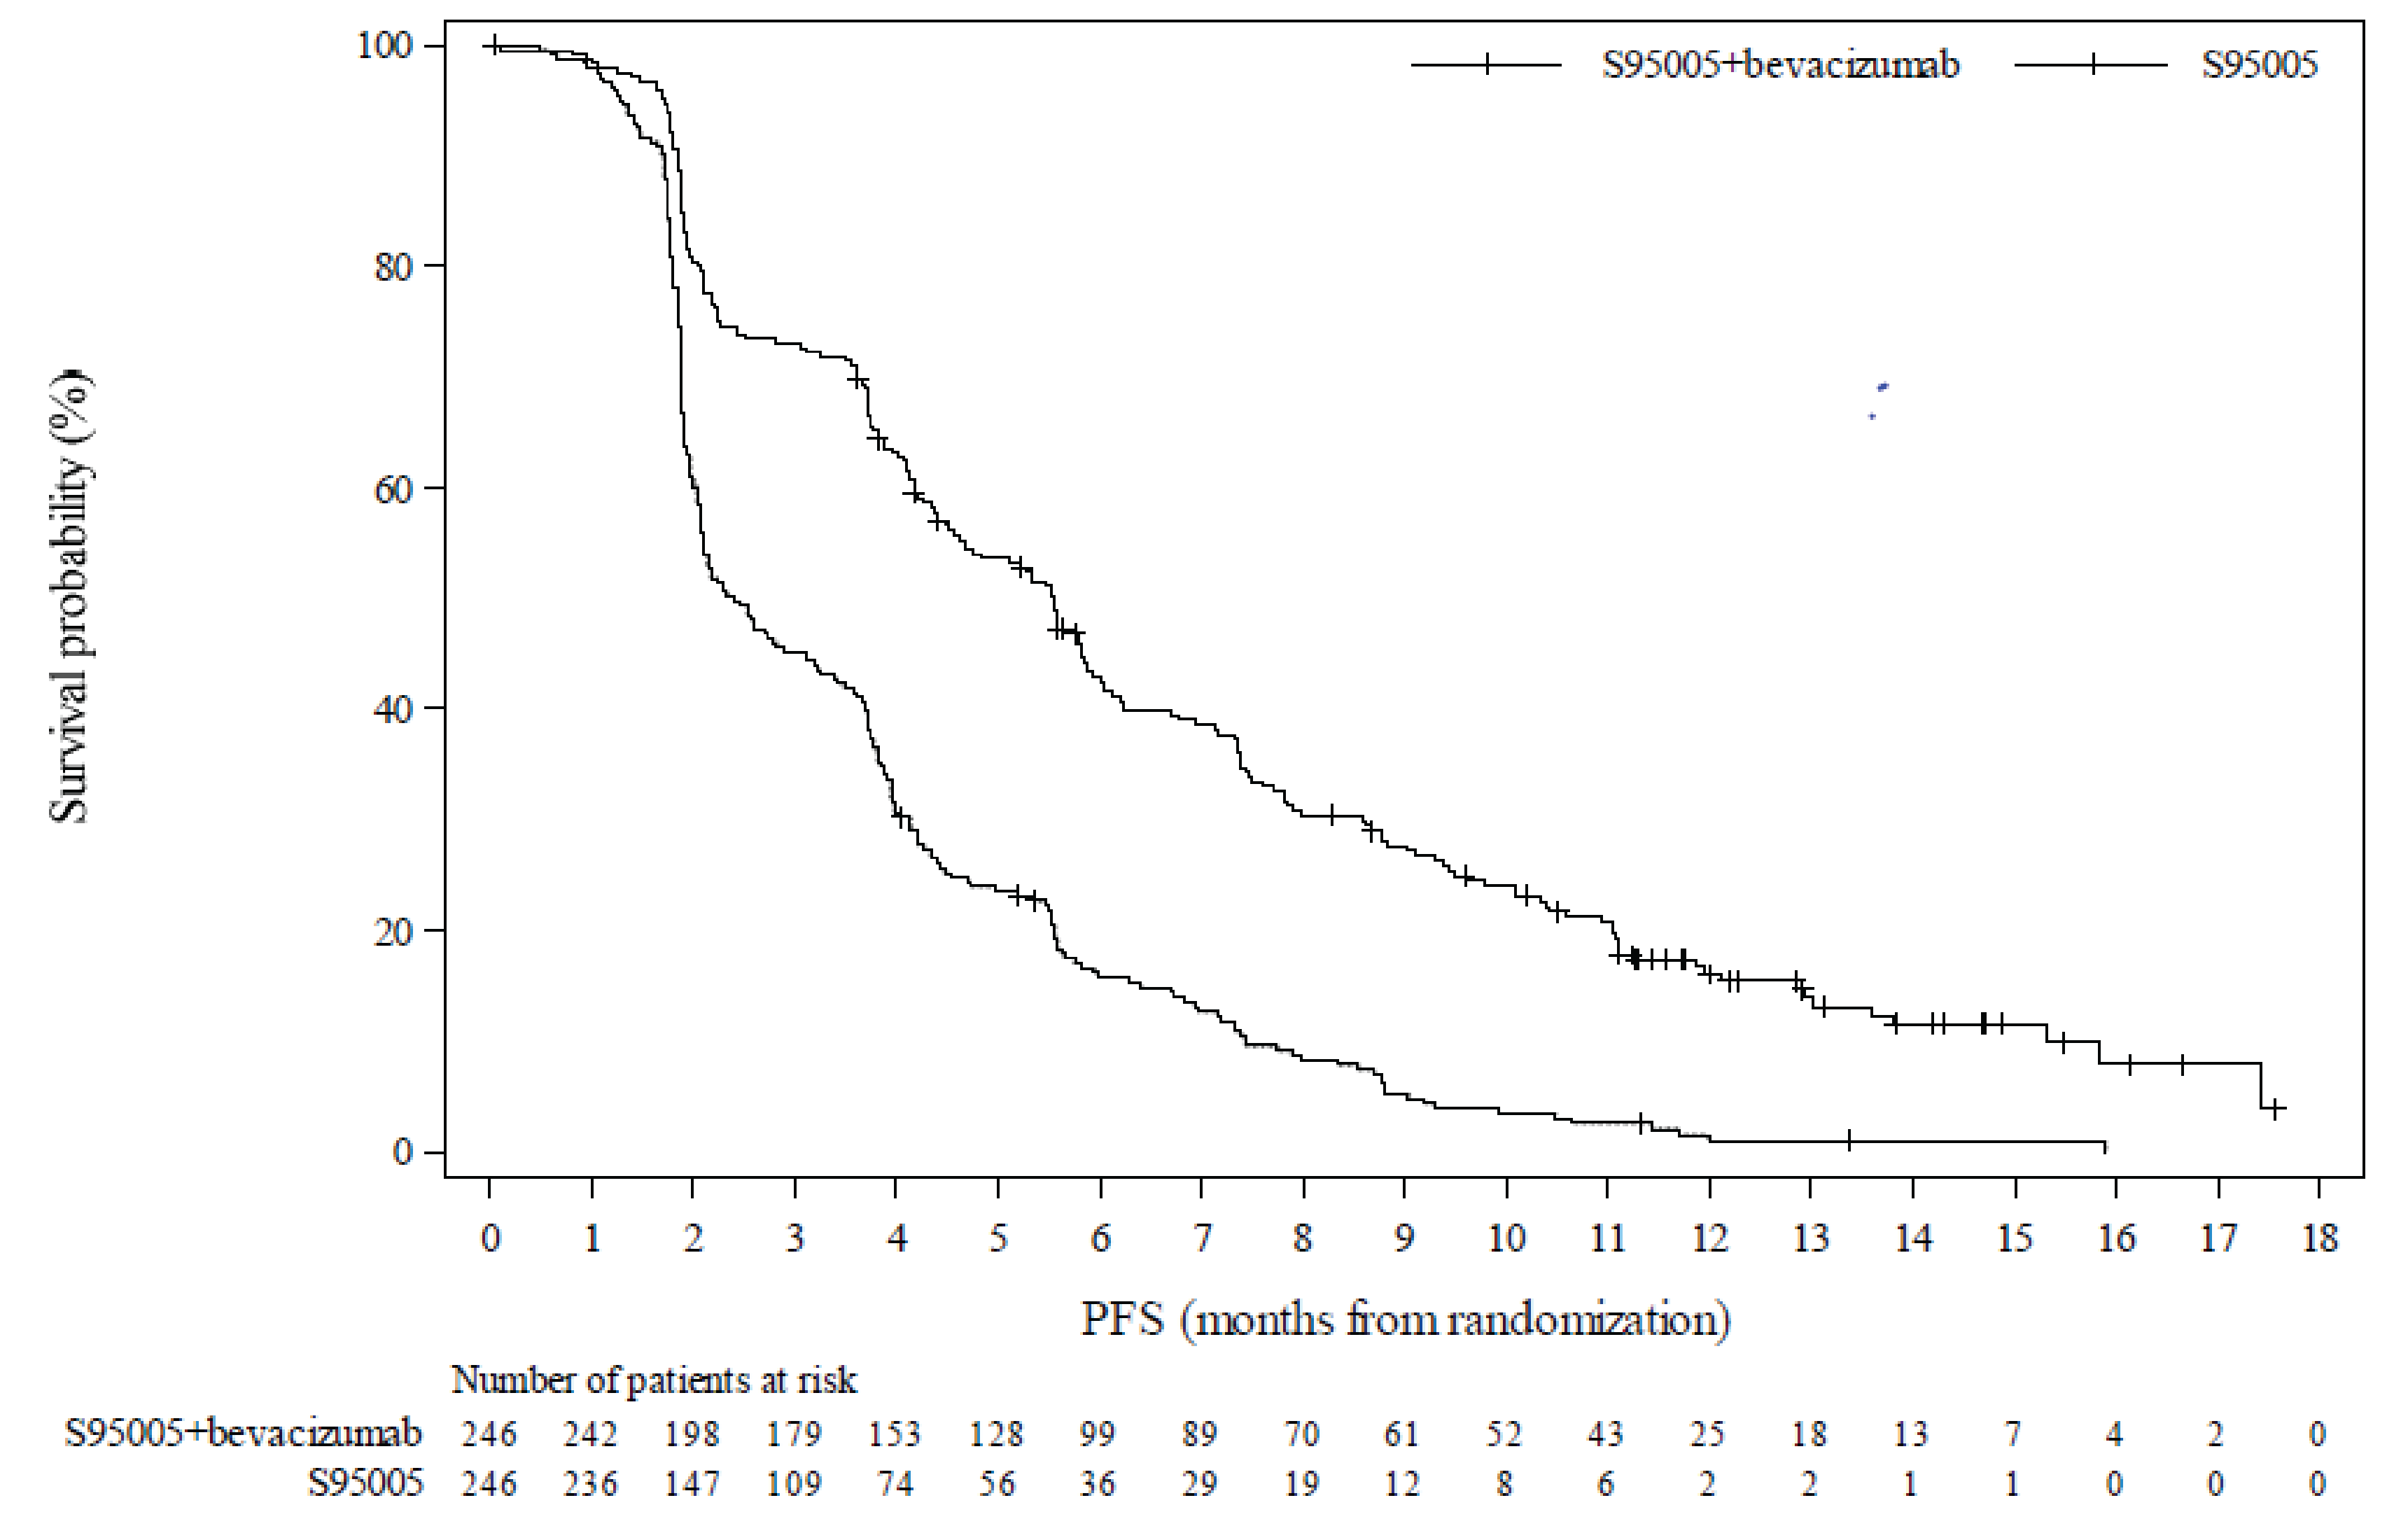 The Kaplan-Meier curves of progression-free survival showed some crossover early during treatment followed by clear separation at about 2 months after randomization between trifluridine-tipiracil plus bevacizumab compared with trifluridine-tipiracil alone. Median progression-free survival was 5.6 months for trifluridine-tipiracil plus bevacizumab and 2.4 months for trifluridine-tipiracil alone, with a low number of patients and events.